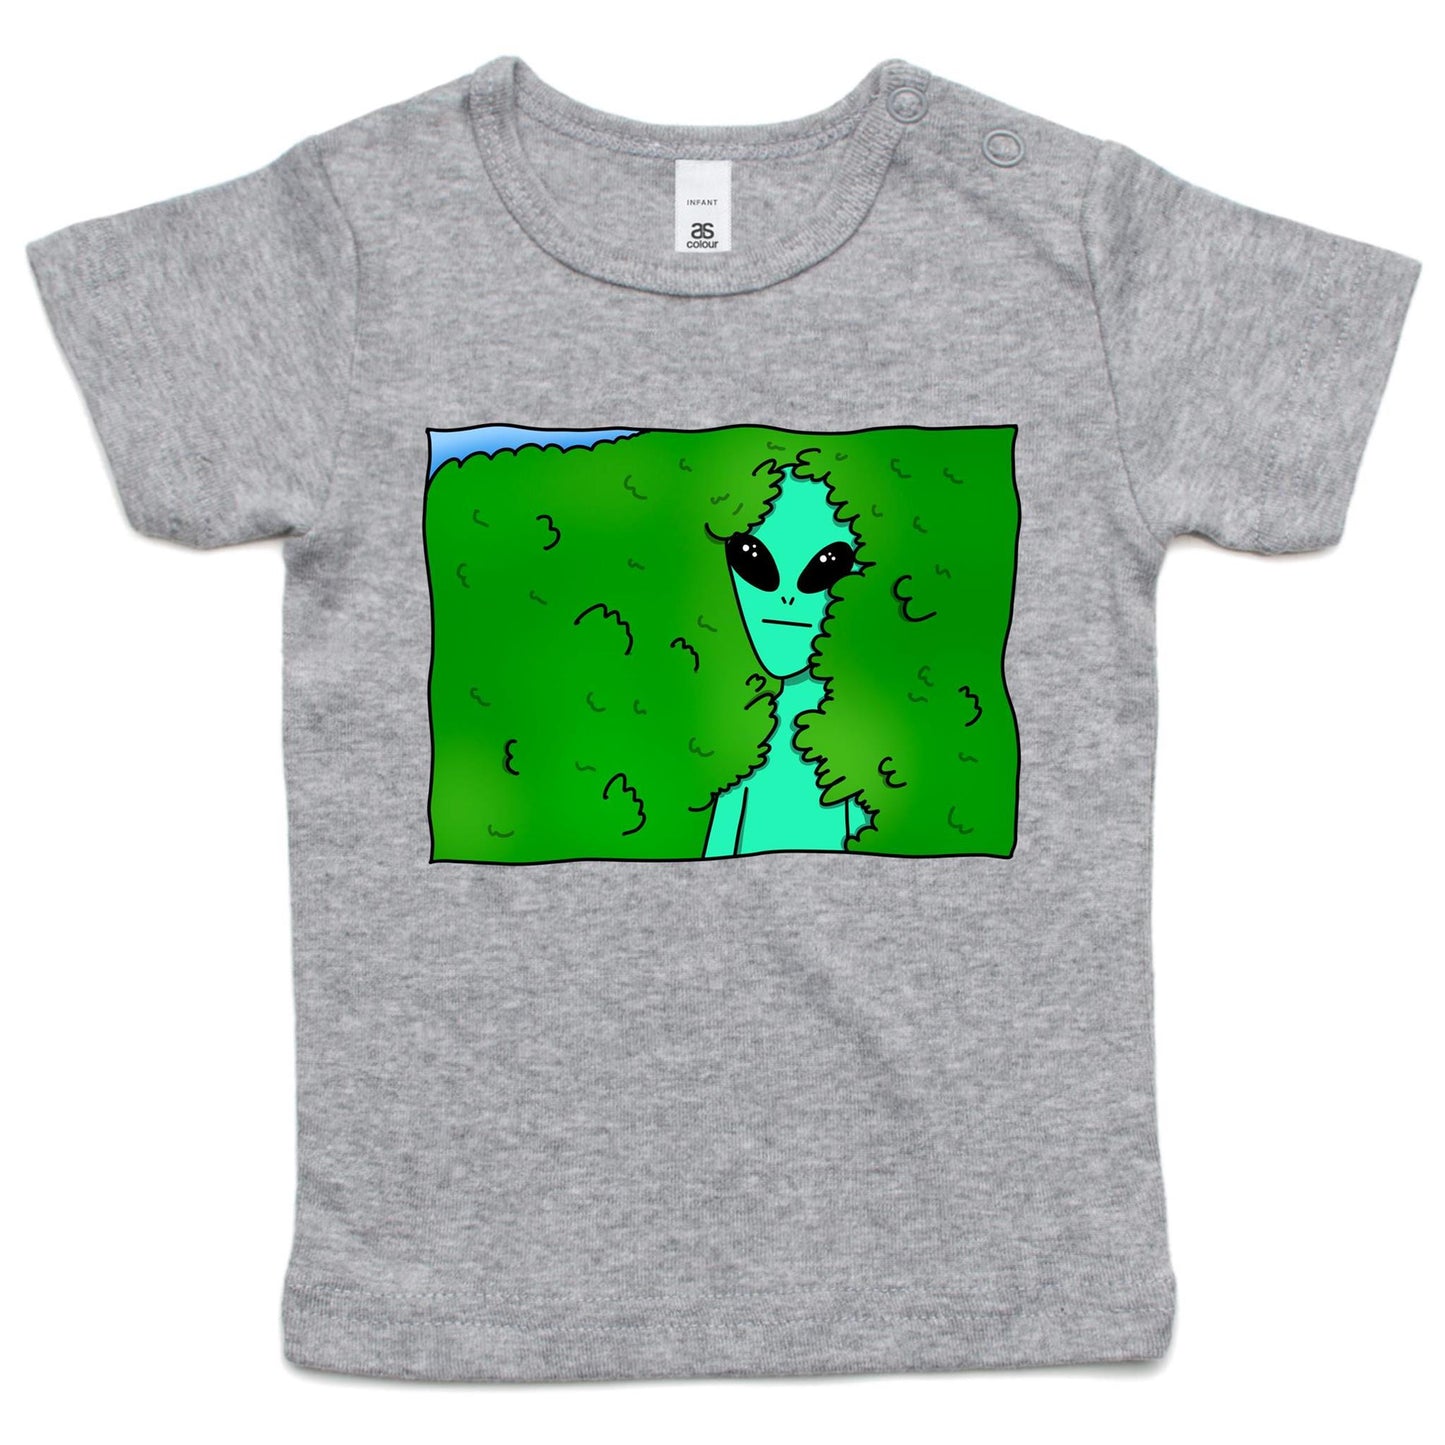 Alien Backing Into Hedge Meme - Baby T-shirt Grey Marle Baby T-shirt Funny Sci Fi